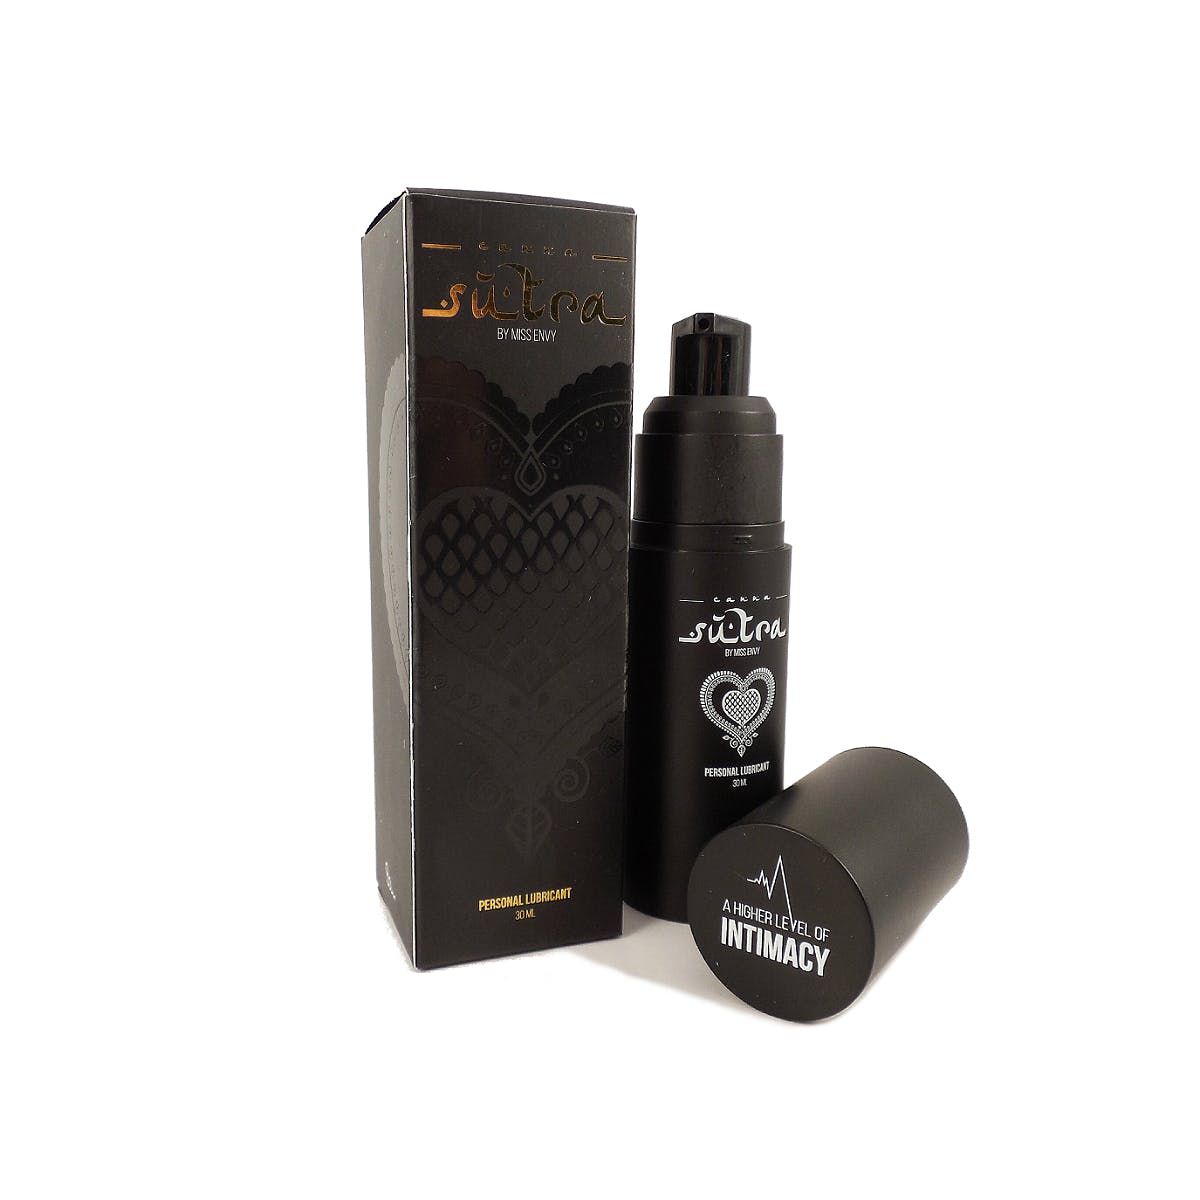 Canna Sutra - Personal Lubricant by Miss Envy